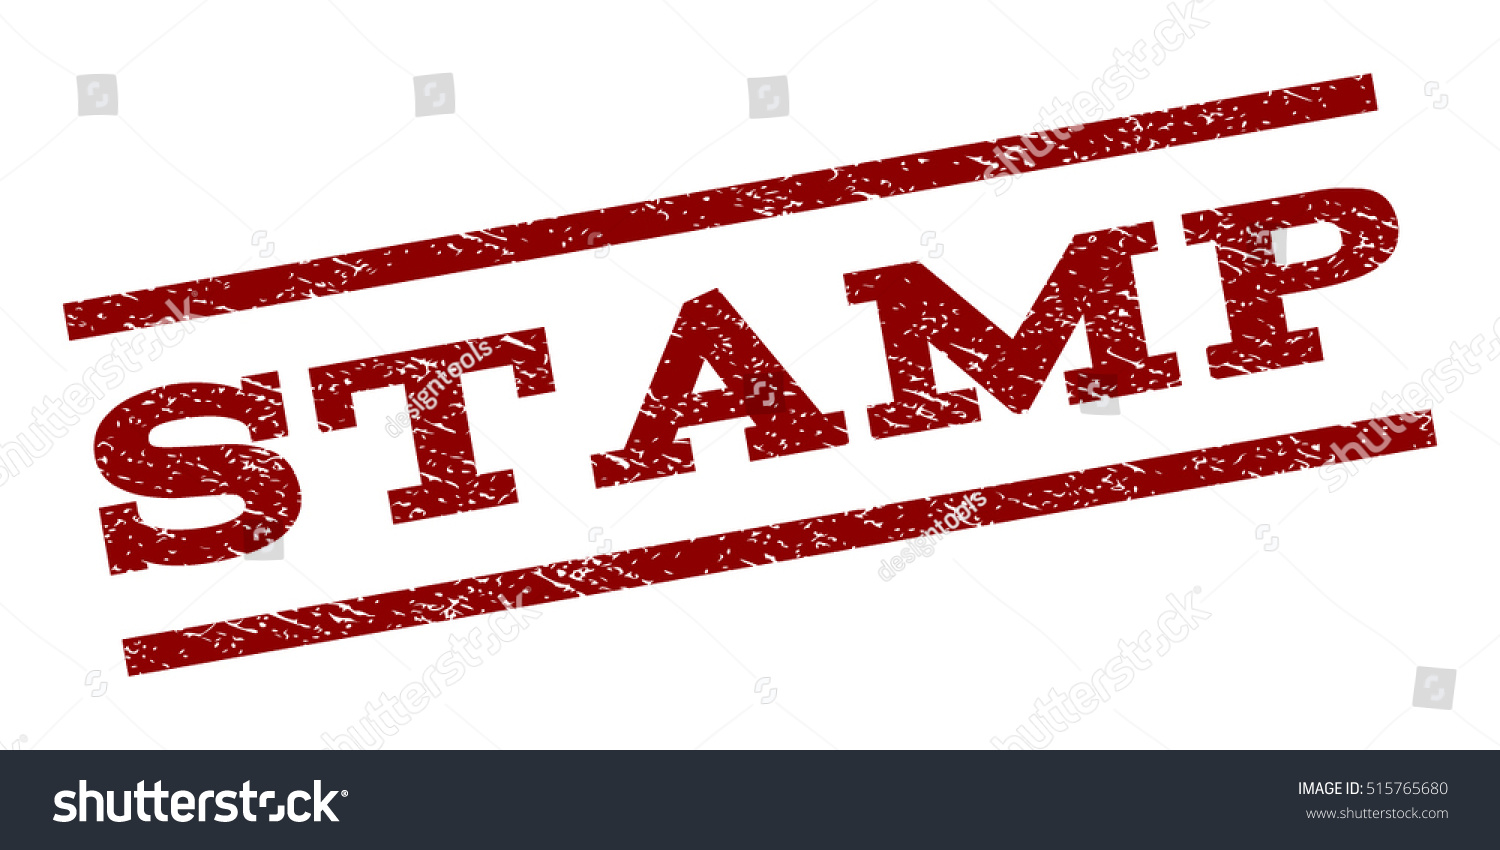 Stamp Watermark Stamp Text Caption Between Stock Vector Royalty Free 515765680